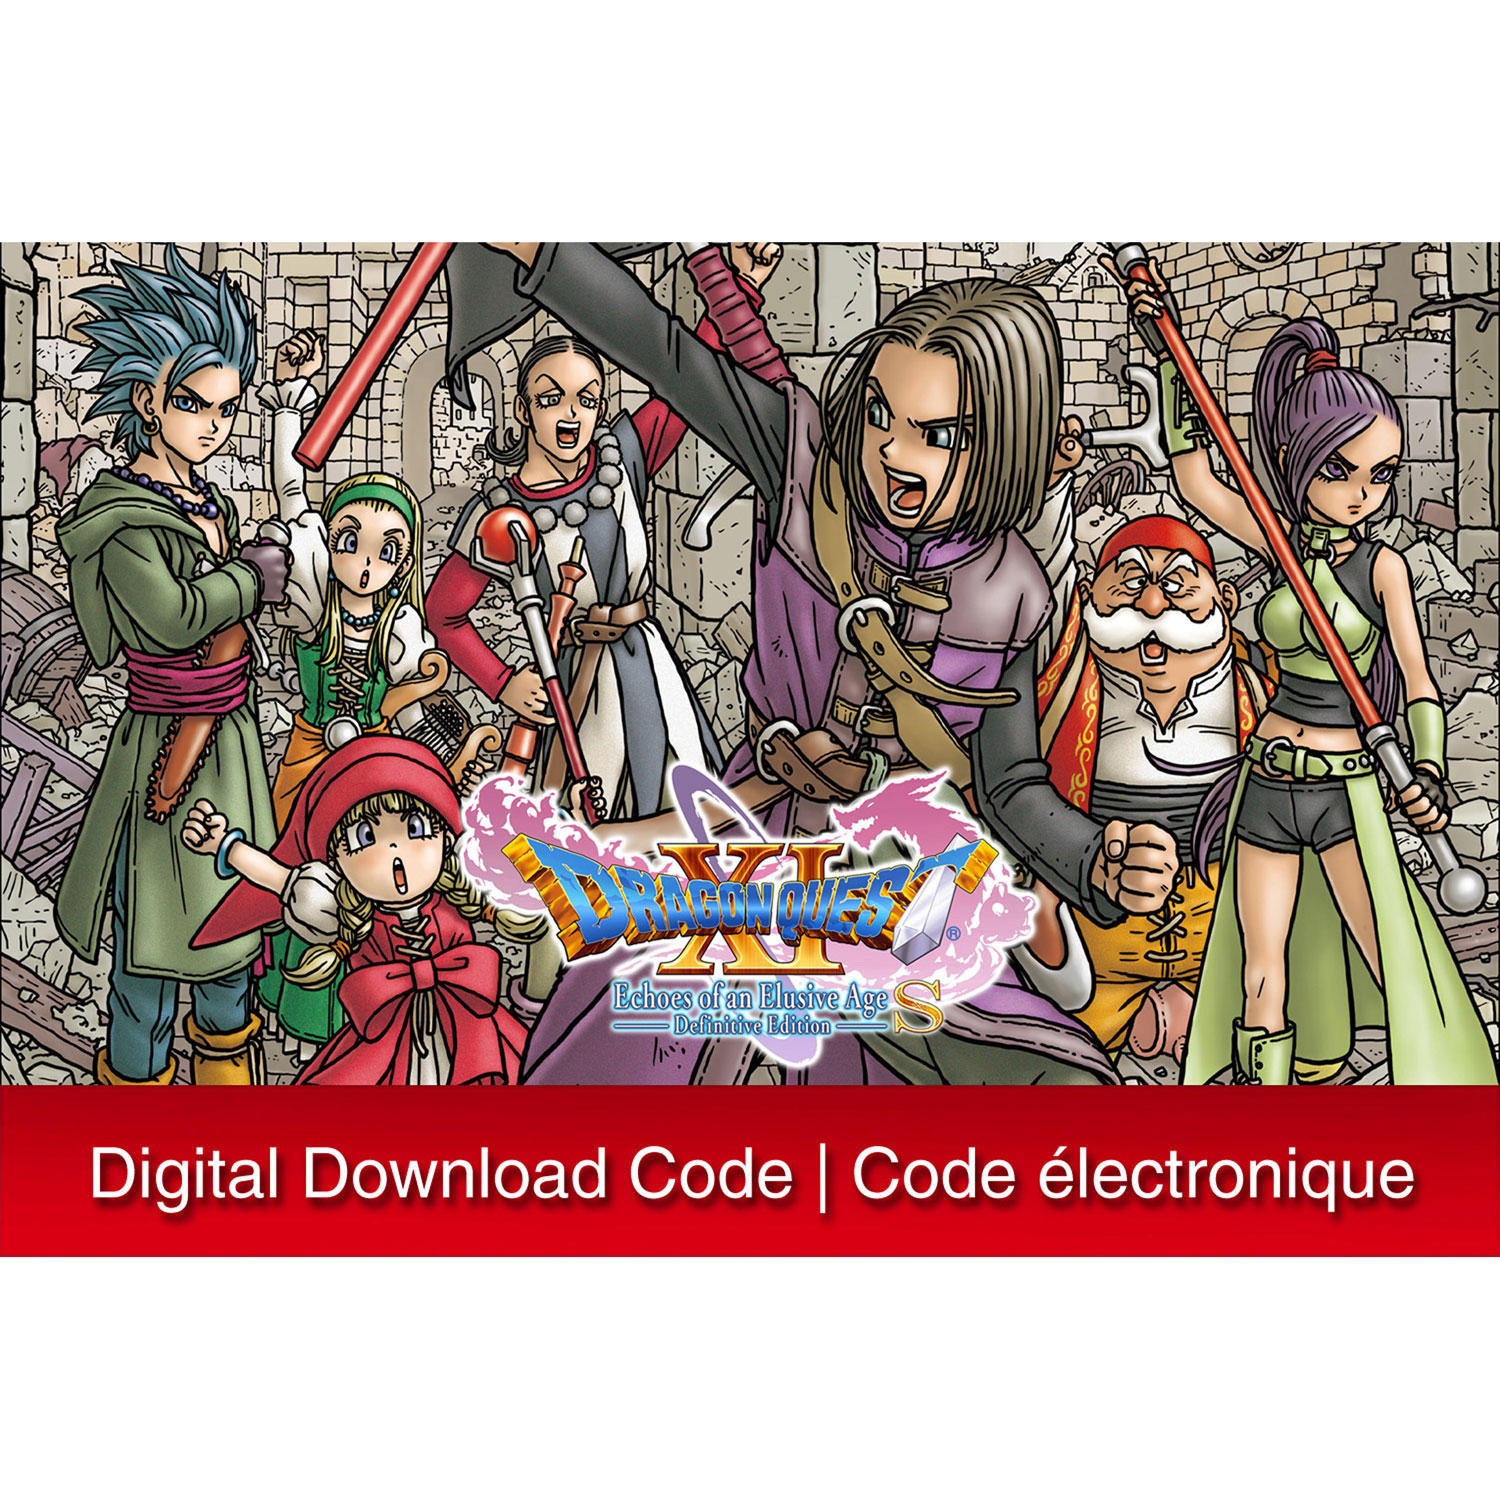 Dragon Quest XI S: Echoes of an Elusive Age - Definitive Edition (Switch) - Digital Download